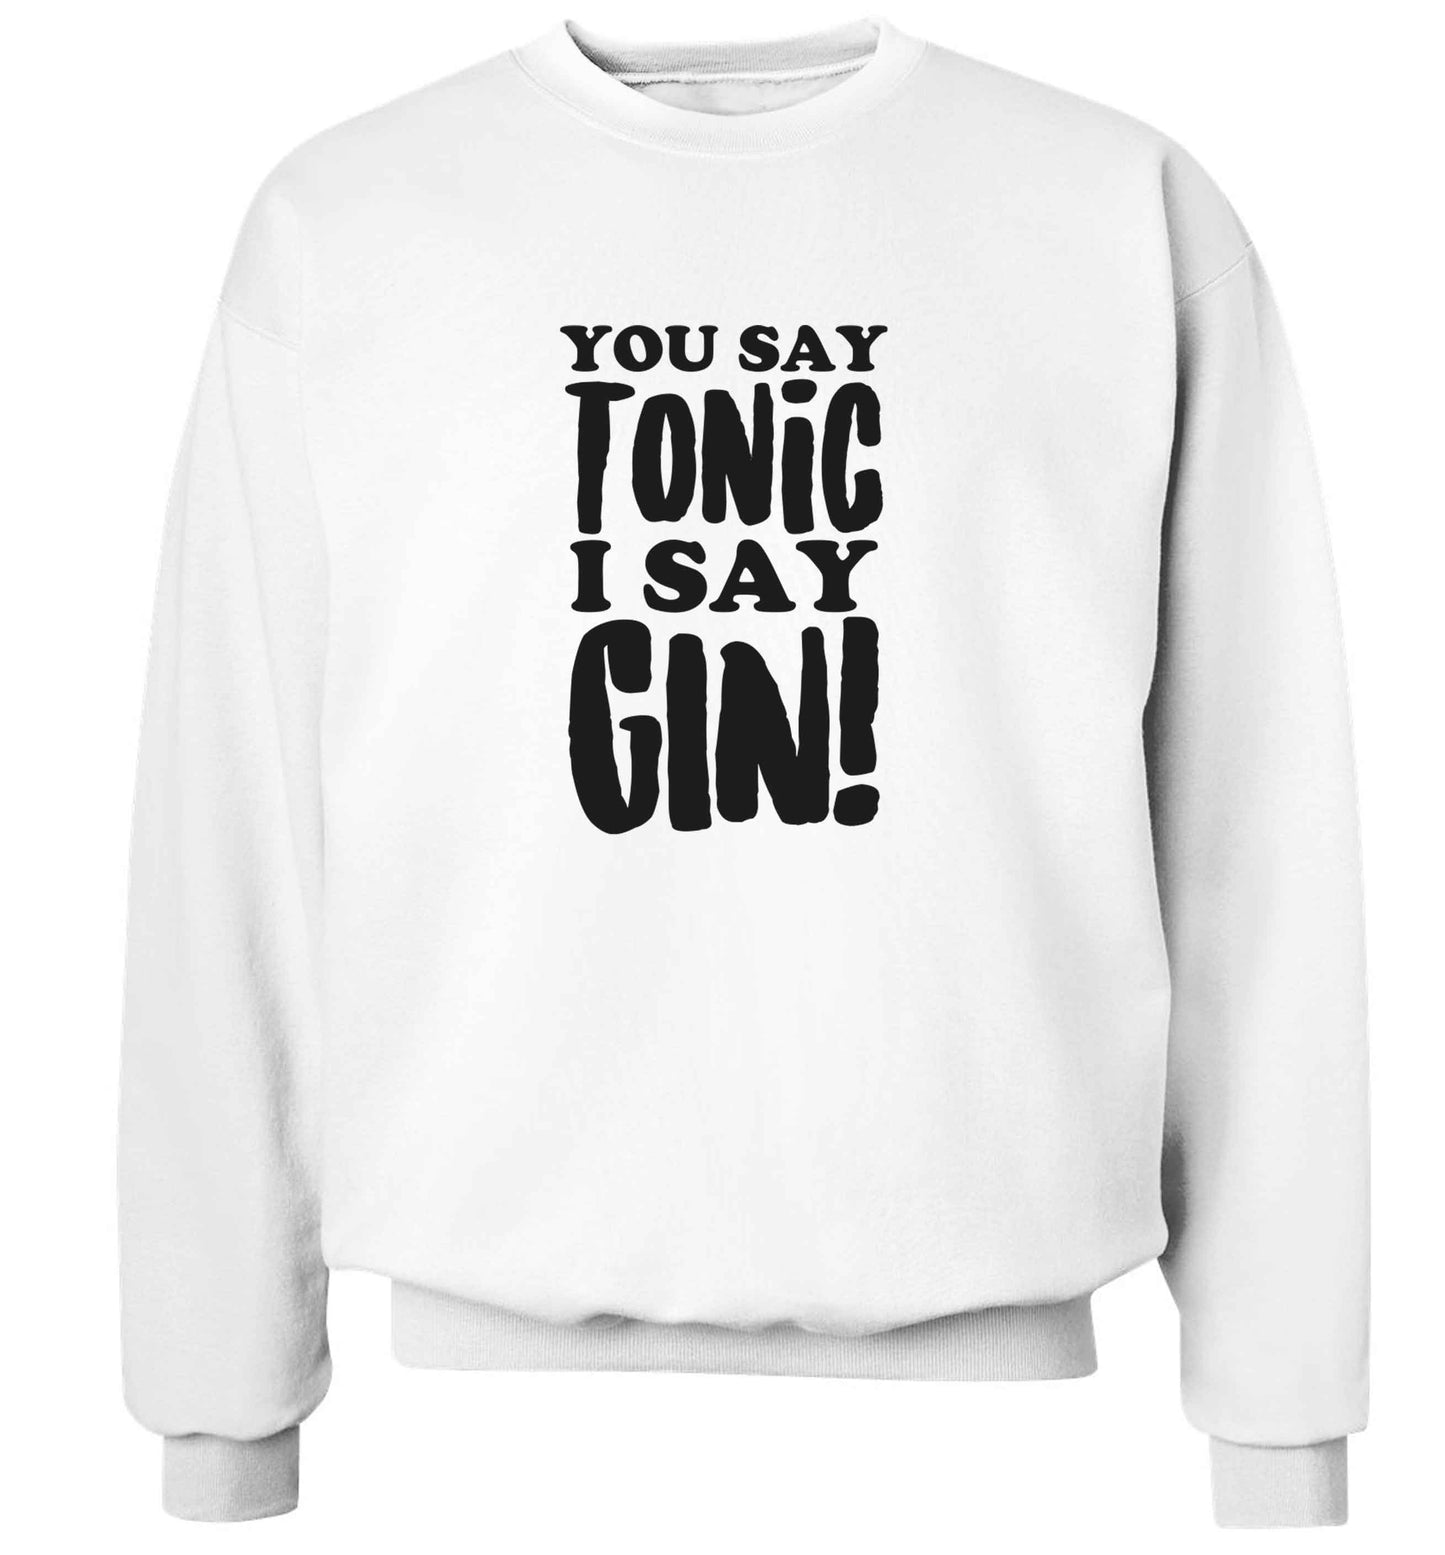 You say tonic I say gin adult's unisex white sweater 2XL